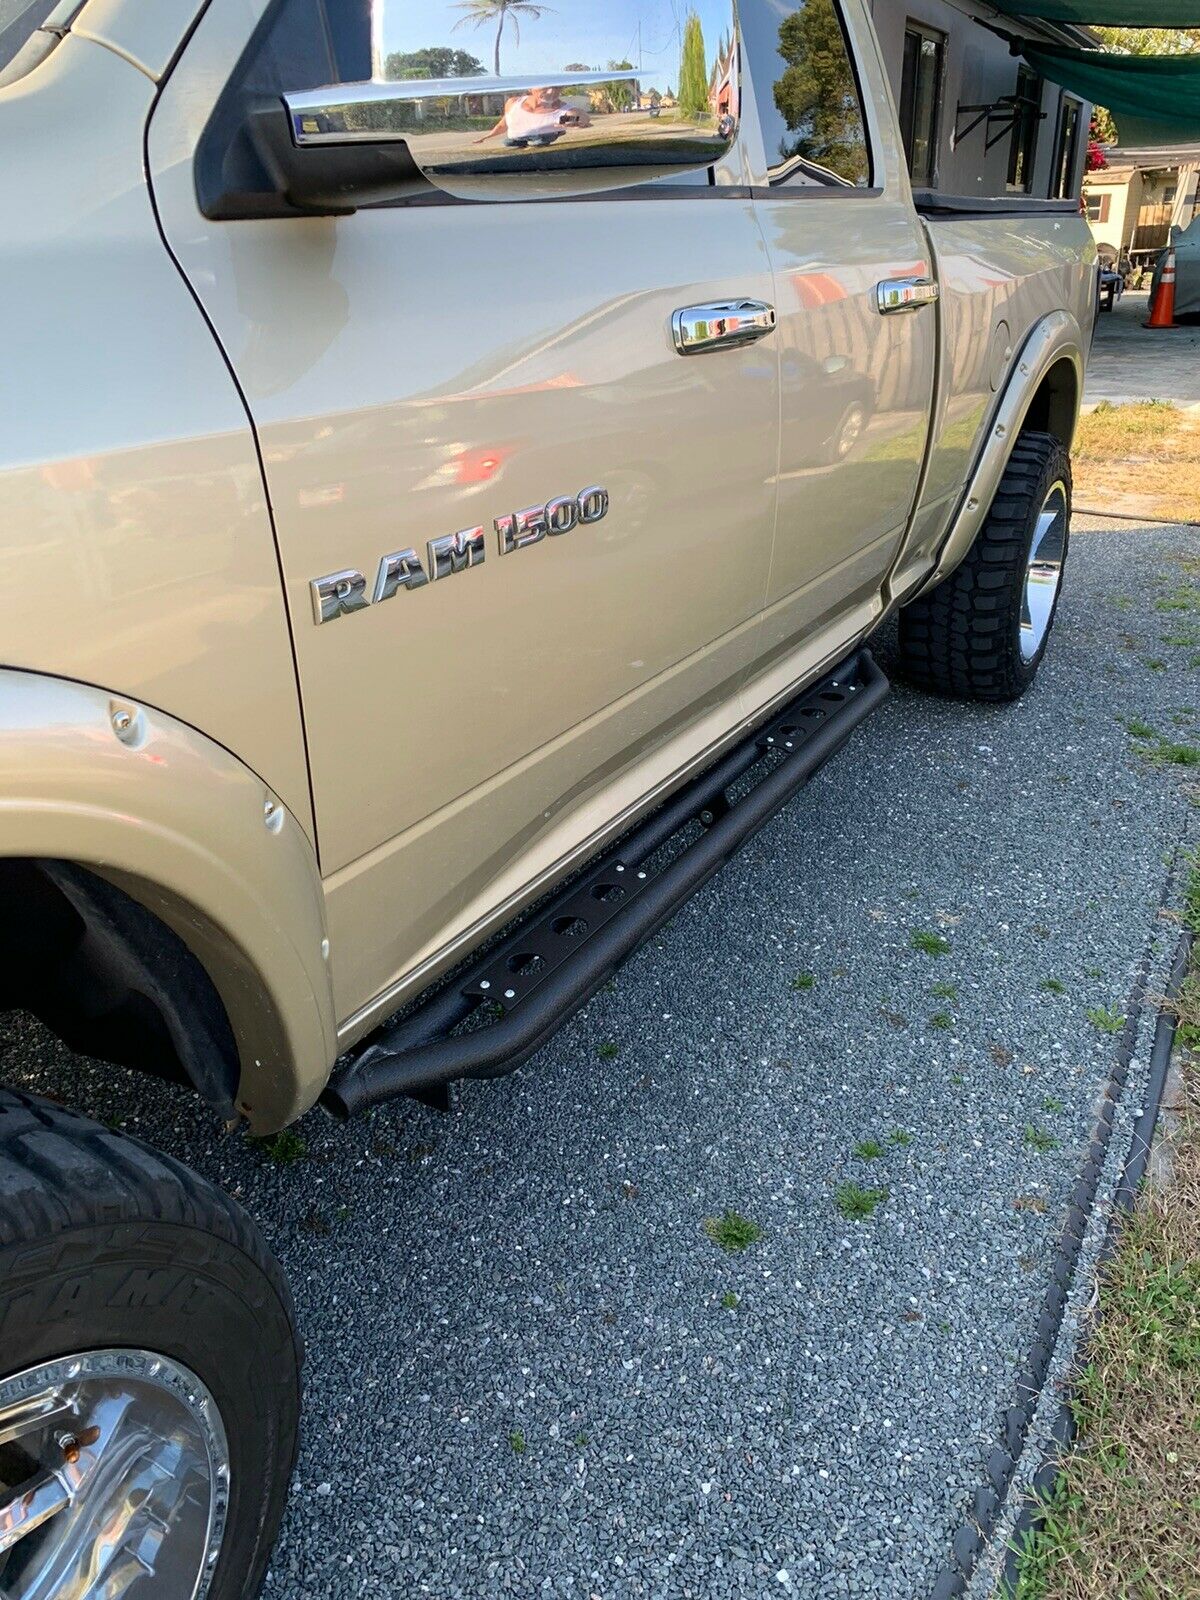 One of the  Best Side Bumper for Dodge Ram Quad cab 2009-2018 By SuperDriveUSA